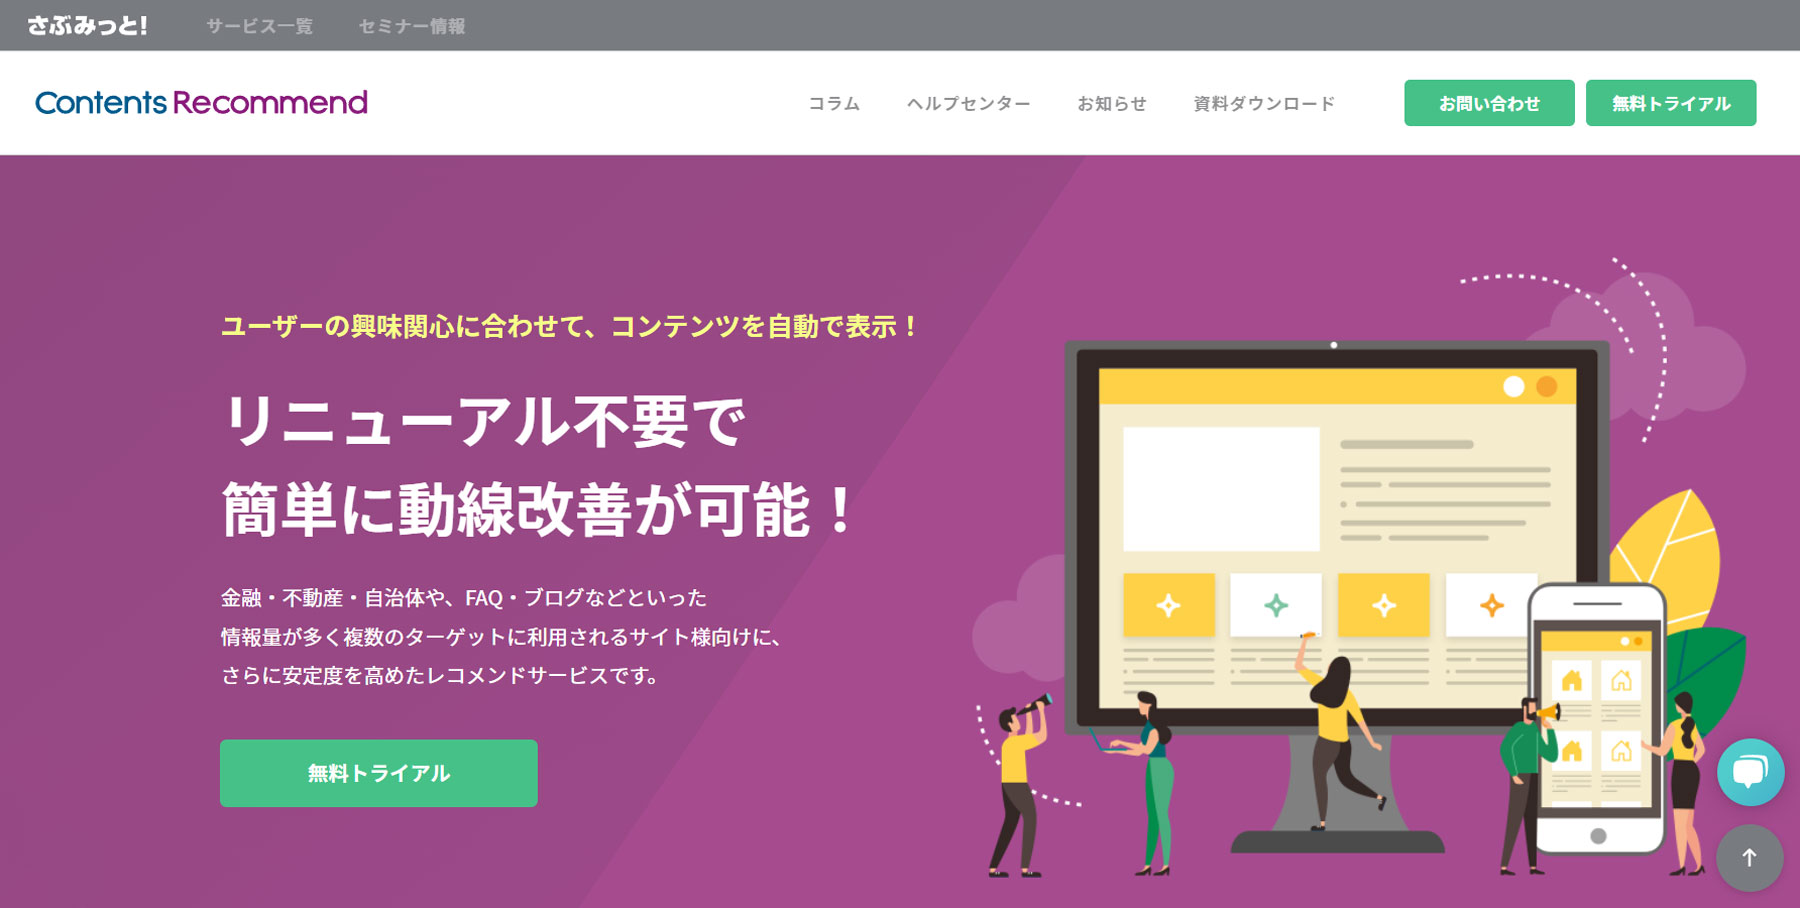 ContentsRecommend公式Webサイト